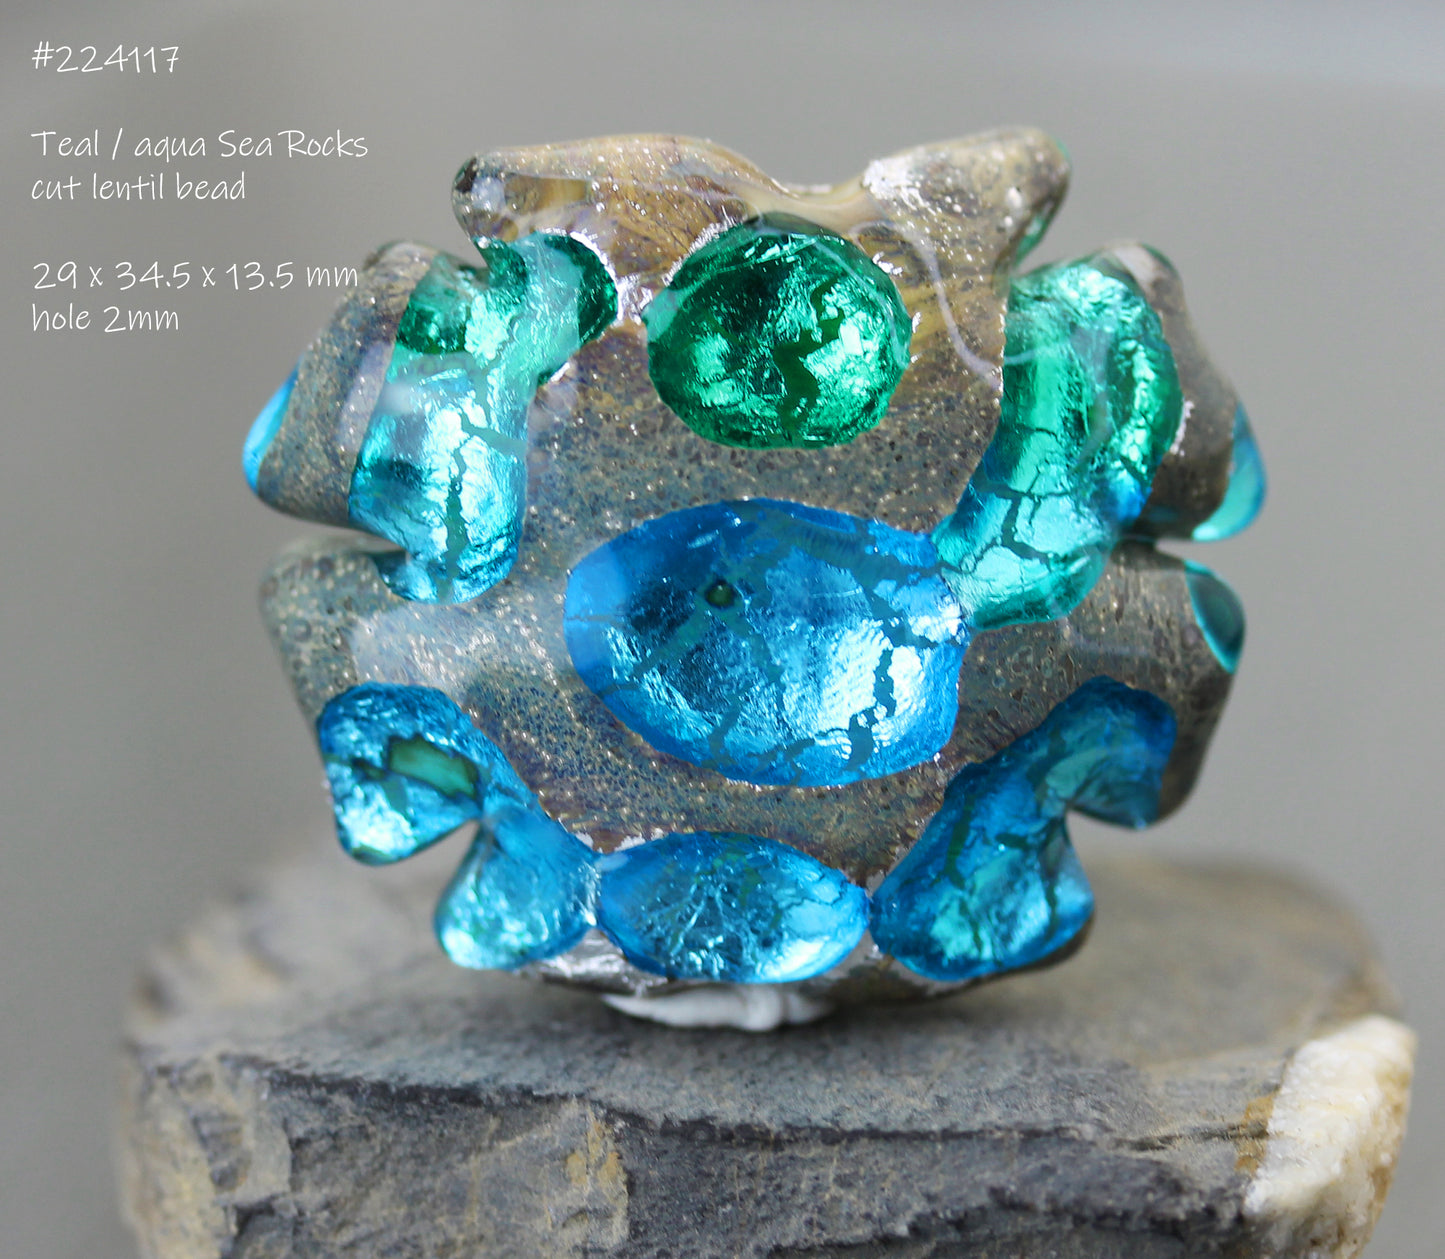 Aqua blue and teal green lampwork glass focal bead shaped like a cut lentil, to resemble rocks with tidepools.